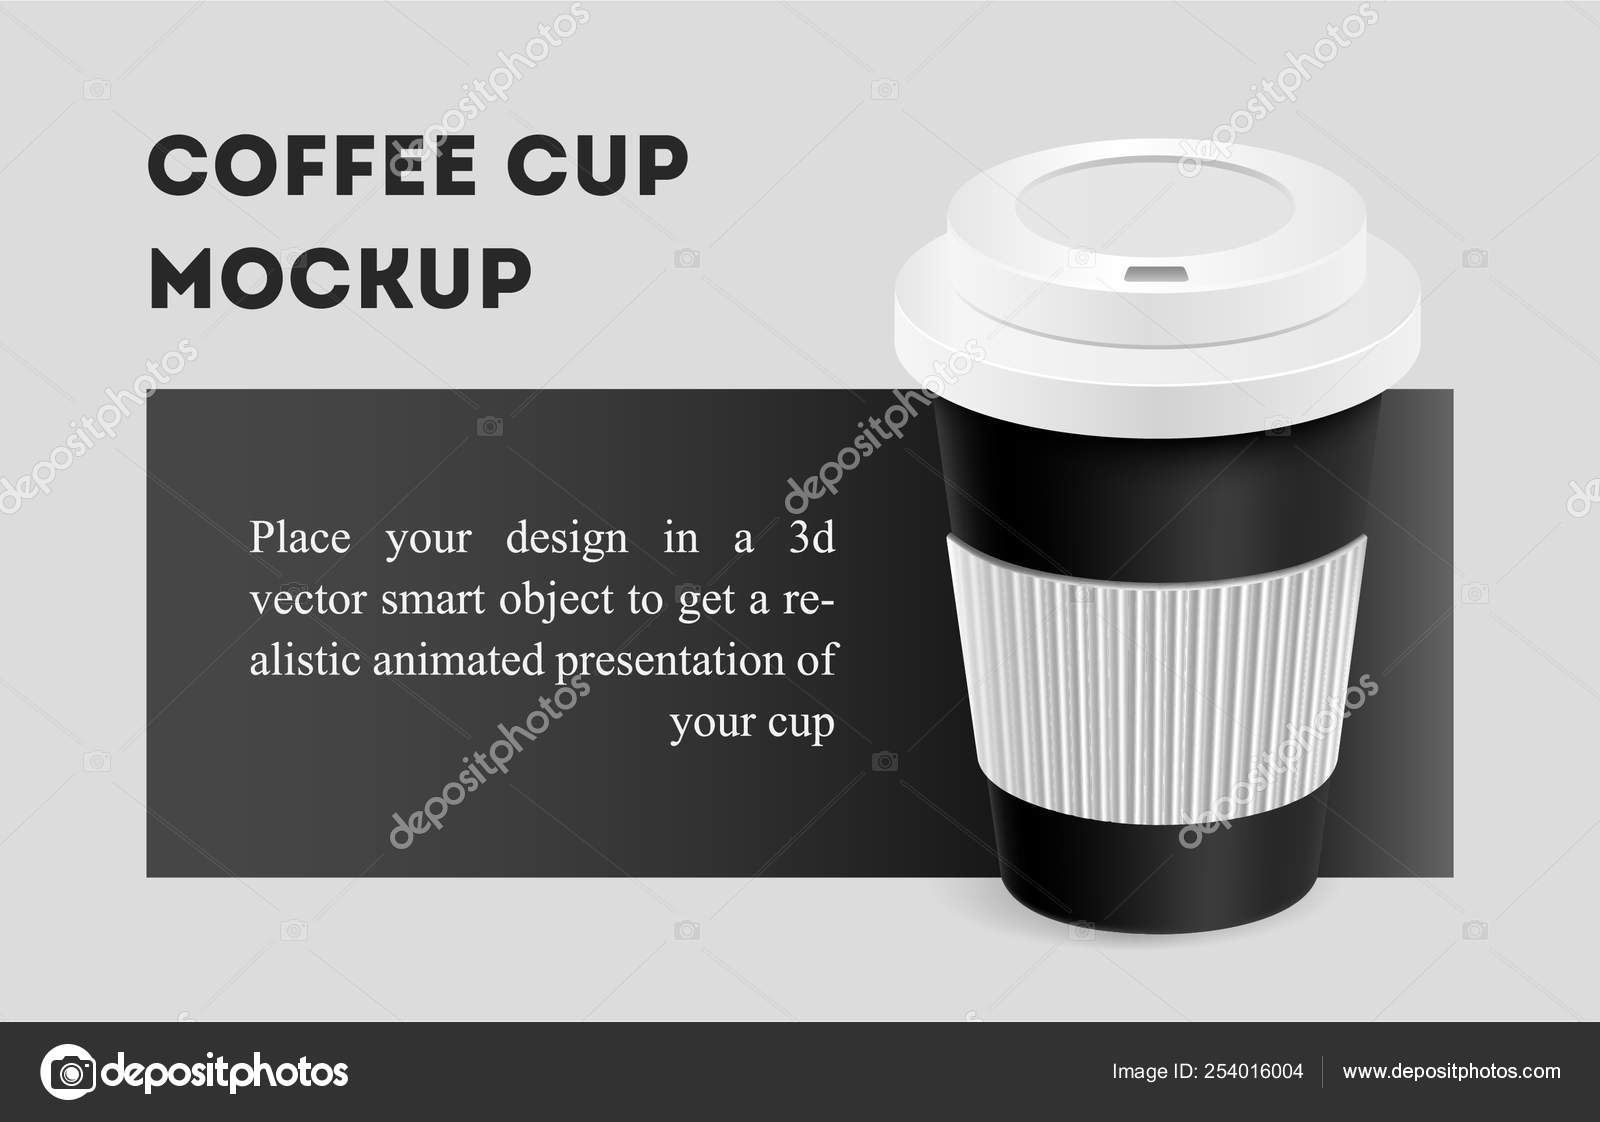 Download Black Coffee Cup With Holder Mockup On Background Vector Image By C Bigunksu Vector Stock 254016004